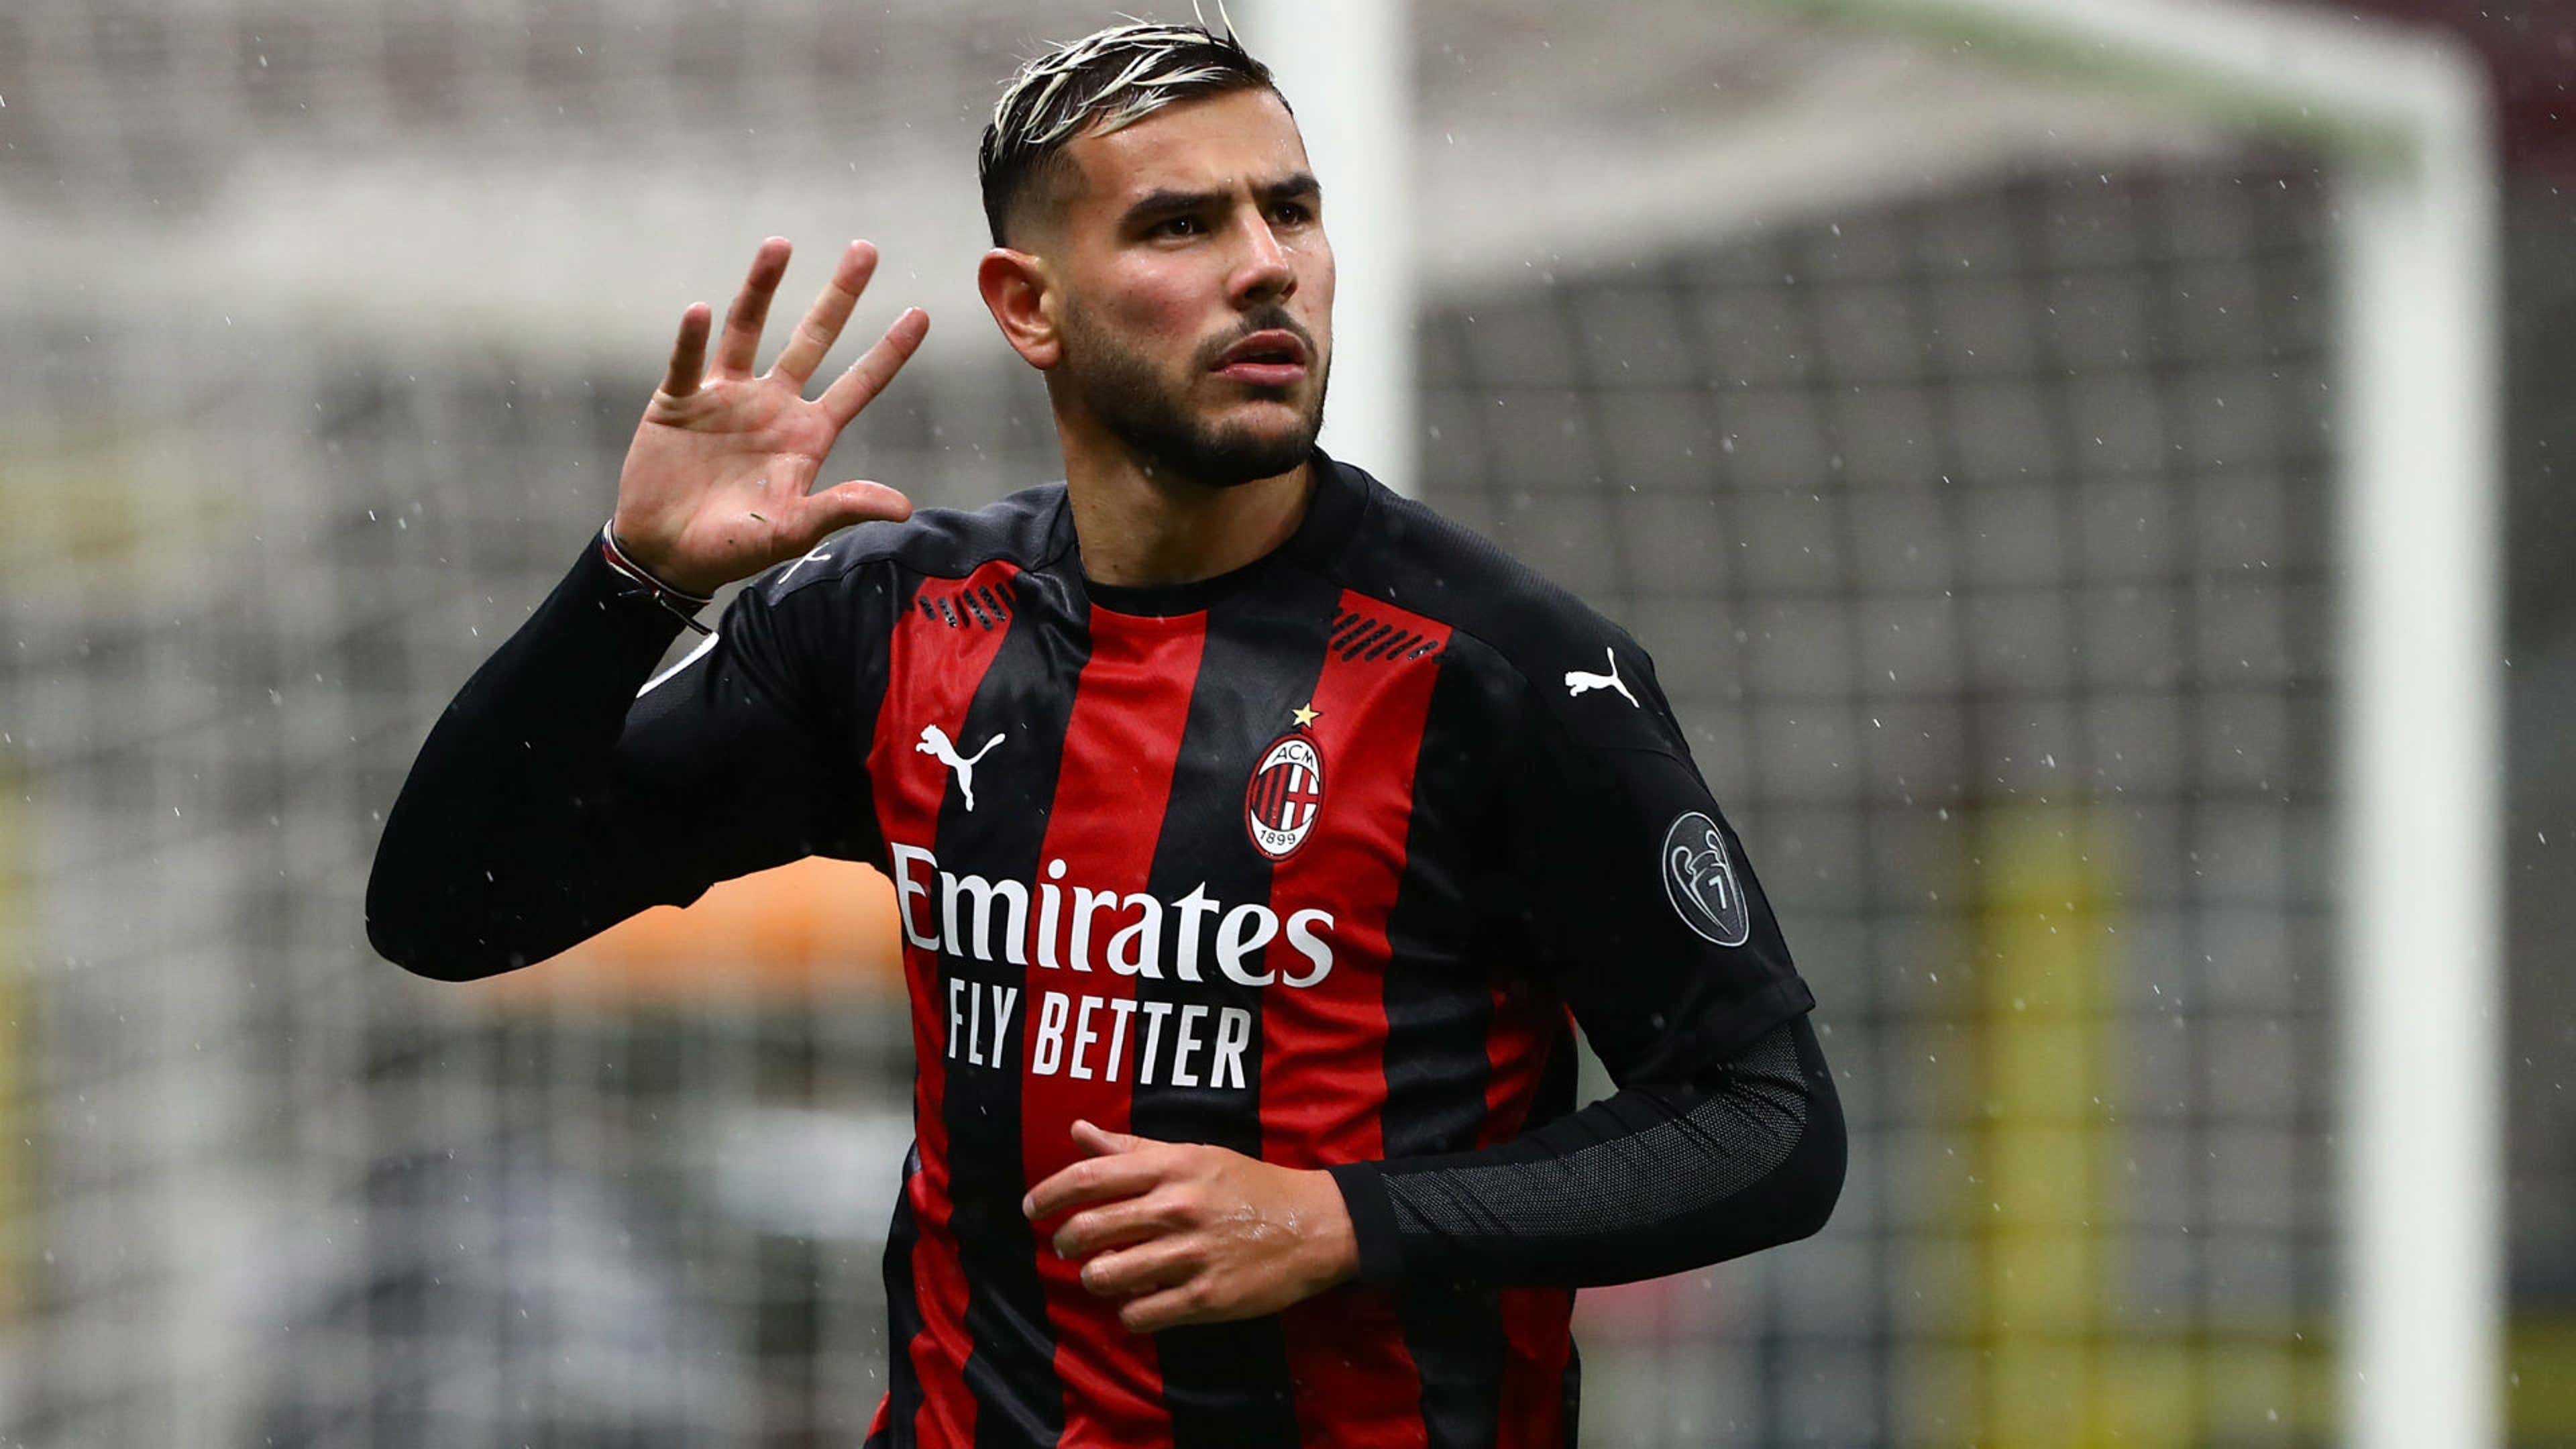  Theo Hernandez of AC Milan celebrates a goal during a match.